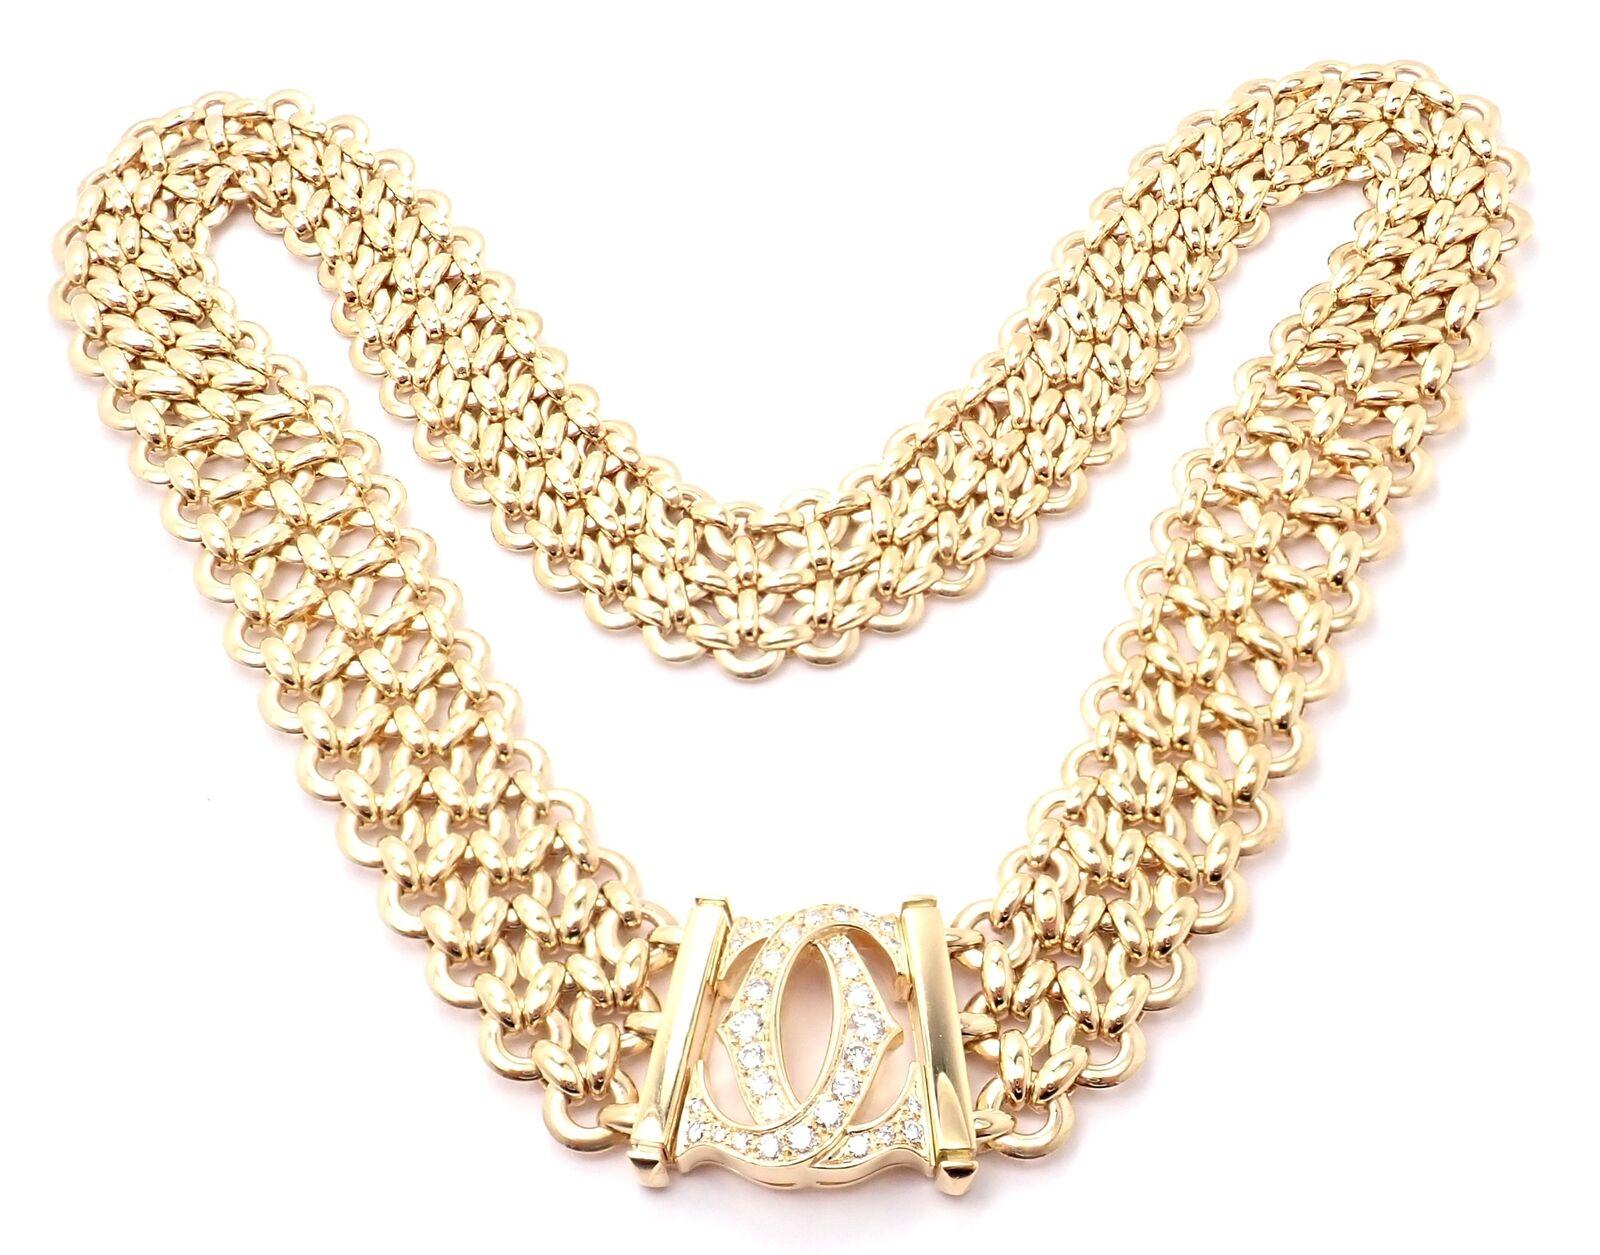 Brilliant Cut Cartier Penelope Diamond Double C Three Row Yellow Gold Necklace For Sale